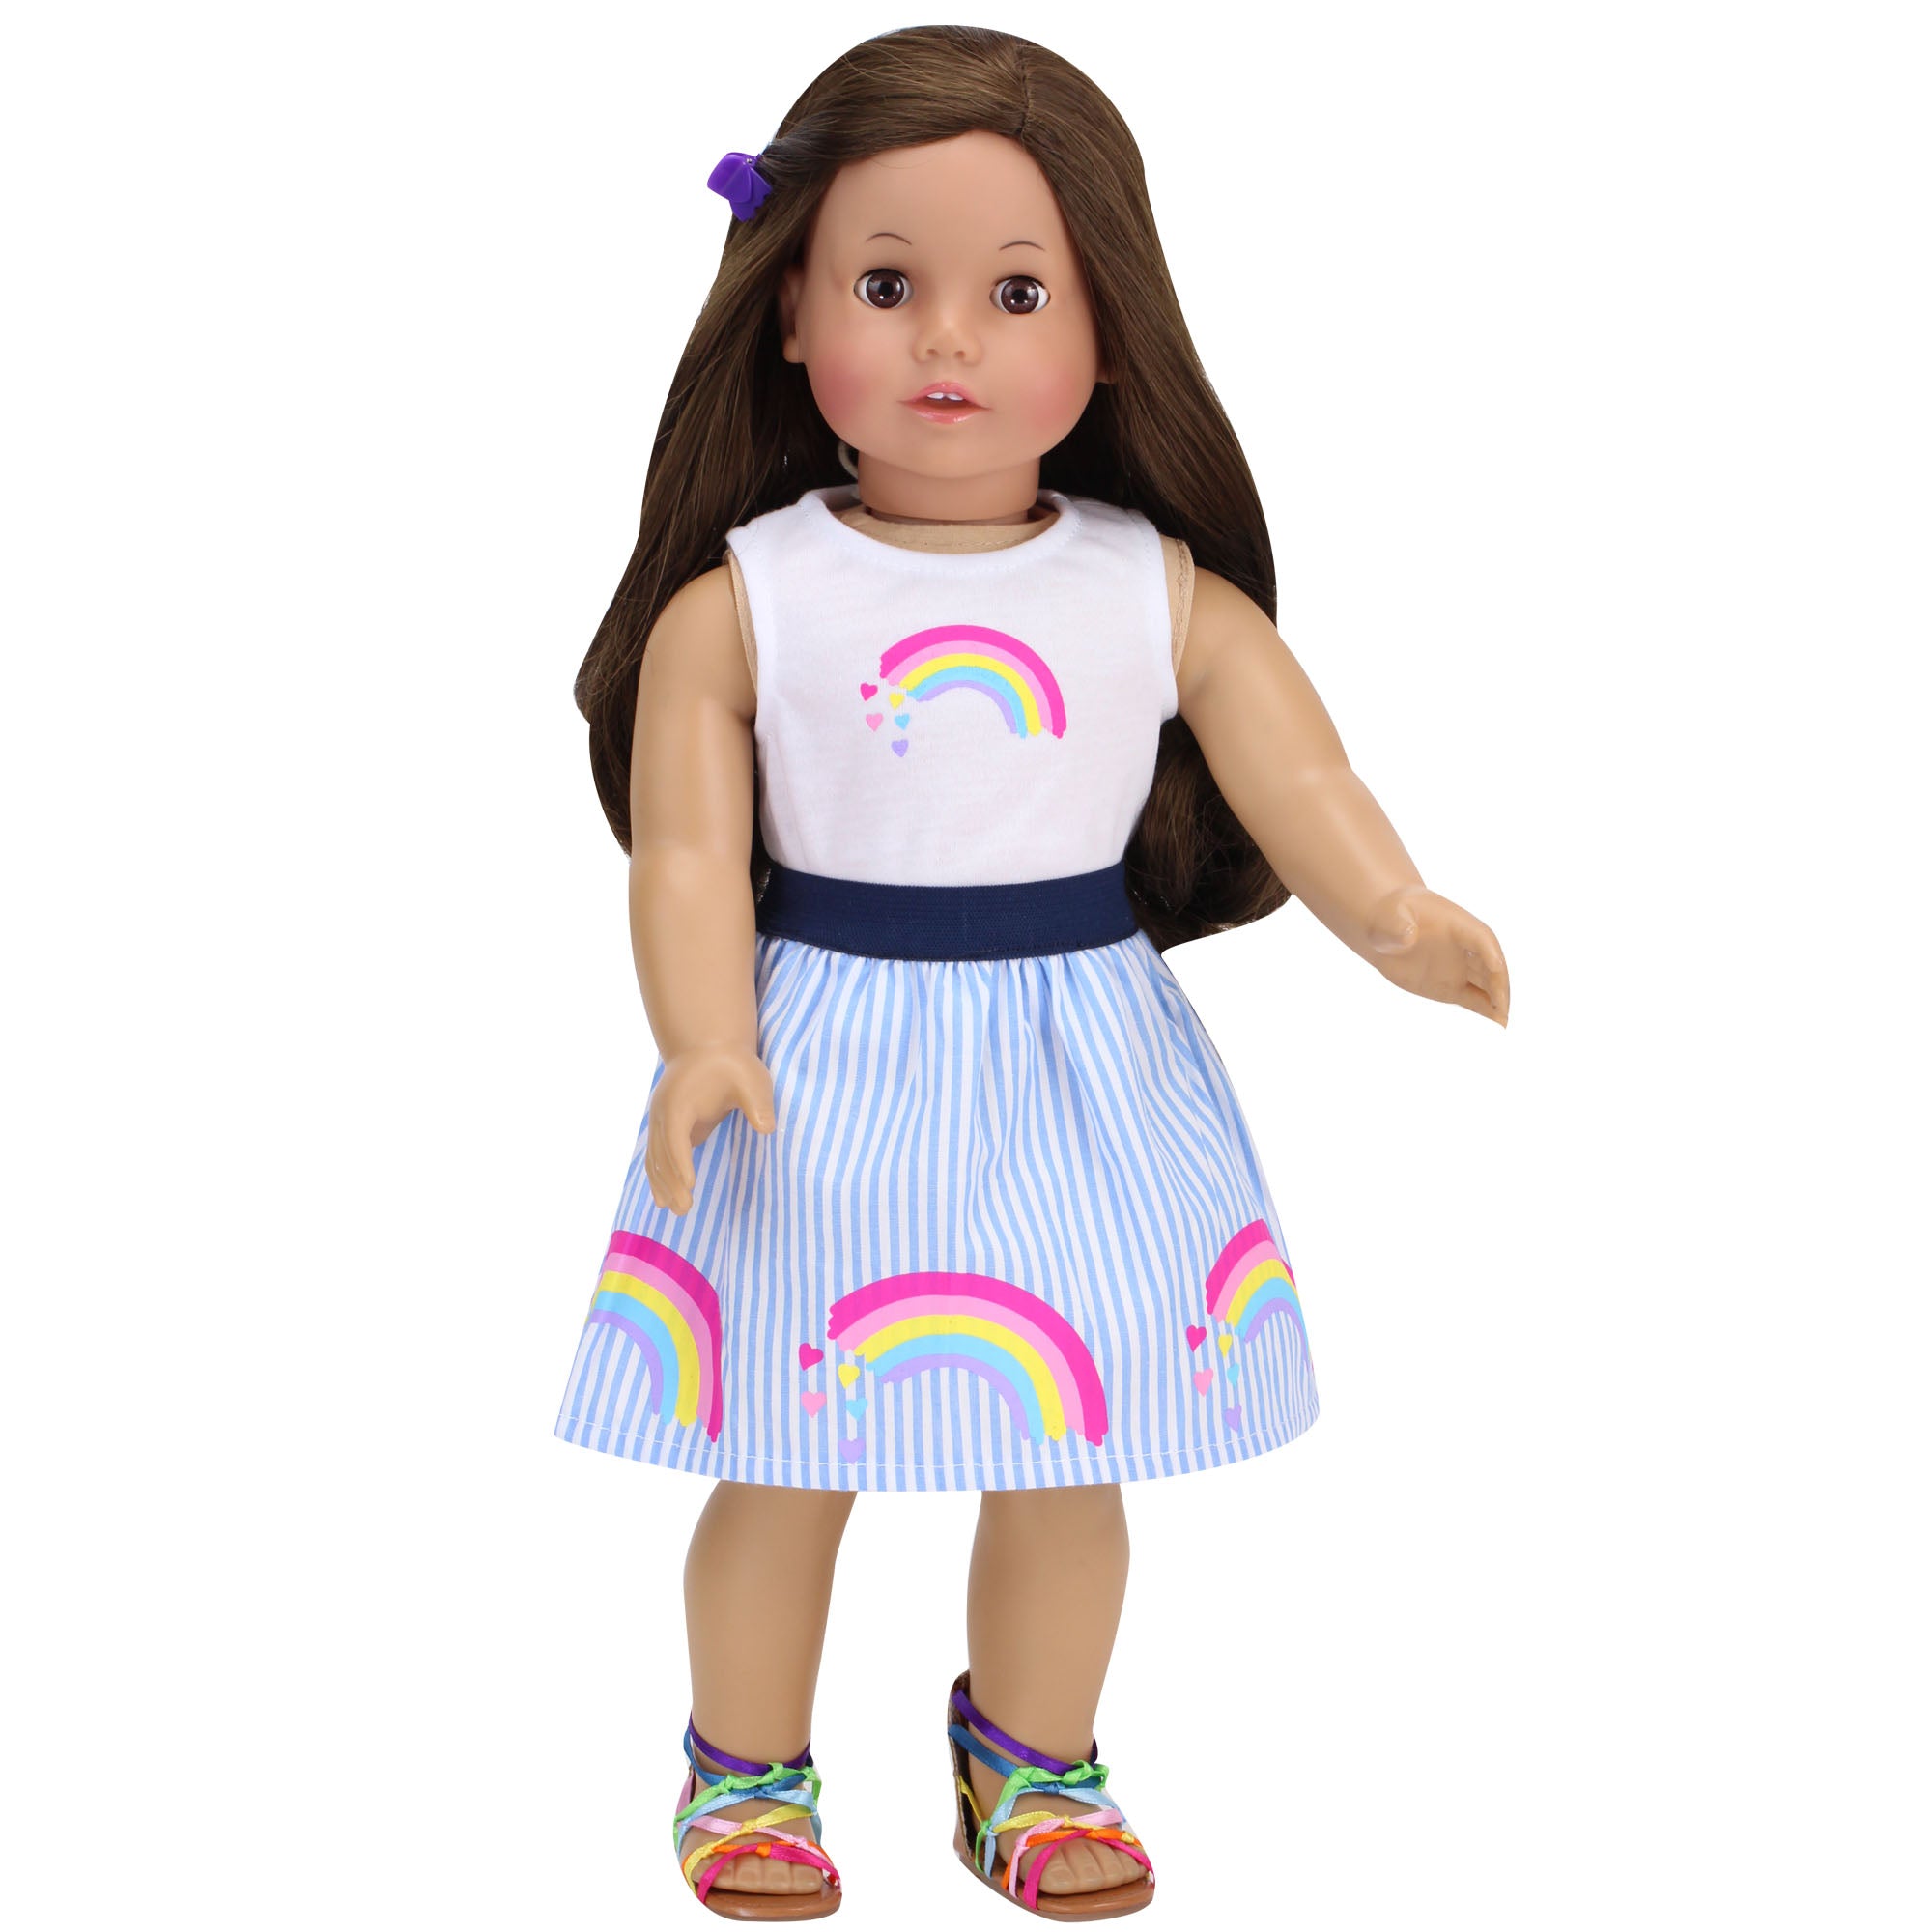 Sophia's Rainbow Shirt and Striped Skirt for 18" Dolls, Multicolor